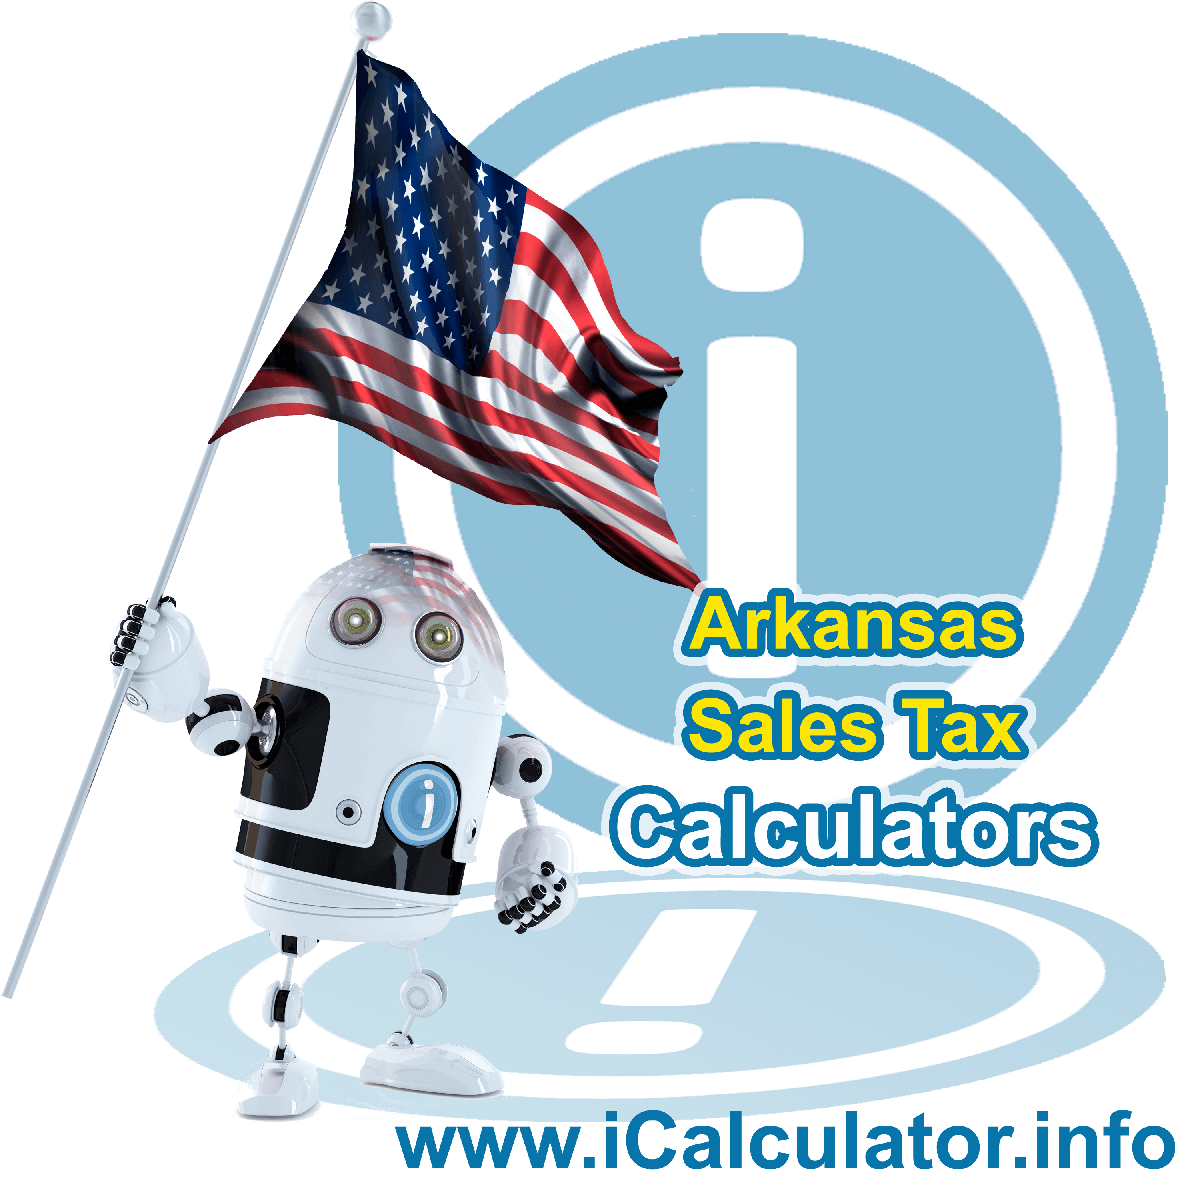 Diaz Sales Rates: This image illustrates a calculator robot calculating Diaz sales tax manually using the Diaz Sales Tax Formula. You can use this information to calculate Diaz Sales Tax manually or use the Diaz Sales Tax Calculator to calculate sales tax online.